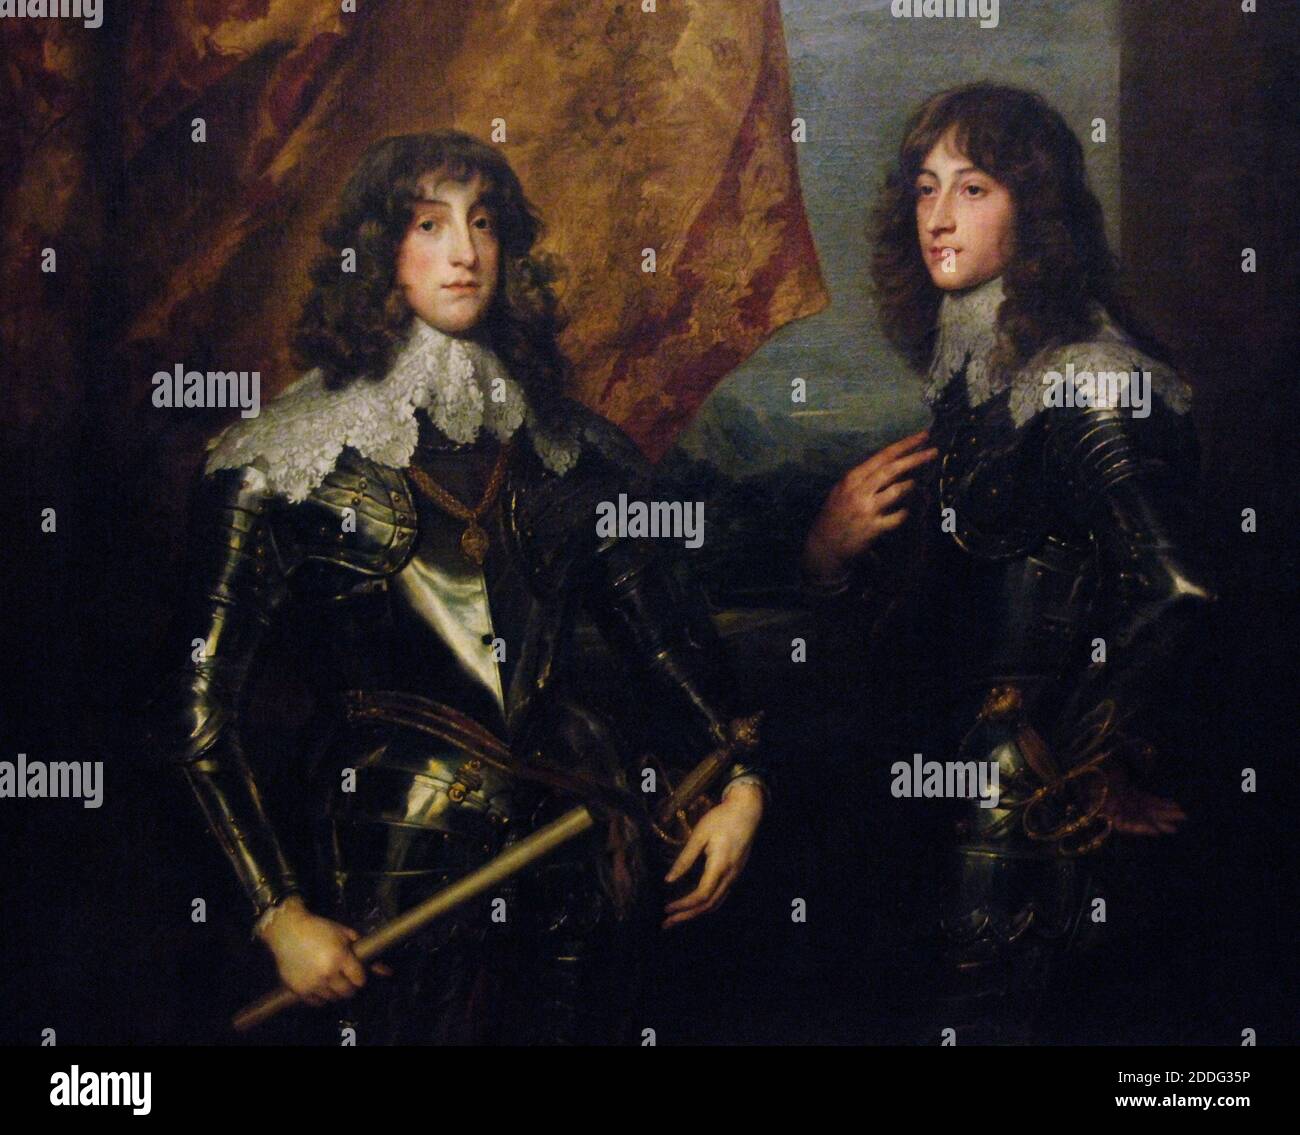 Anton van Dyck (1599-1641). Flemish painter. Portrait of the Princes Charles-Louis I (1617-1680) Elector Palatine and his Brother, Prince Rupert of the Palatinate (1619-1682), 1637. Oil on canvas (132 x 152 cm). Louvre Museum. Paris. France. Stock Photo